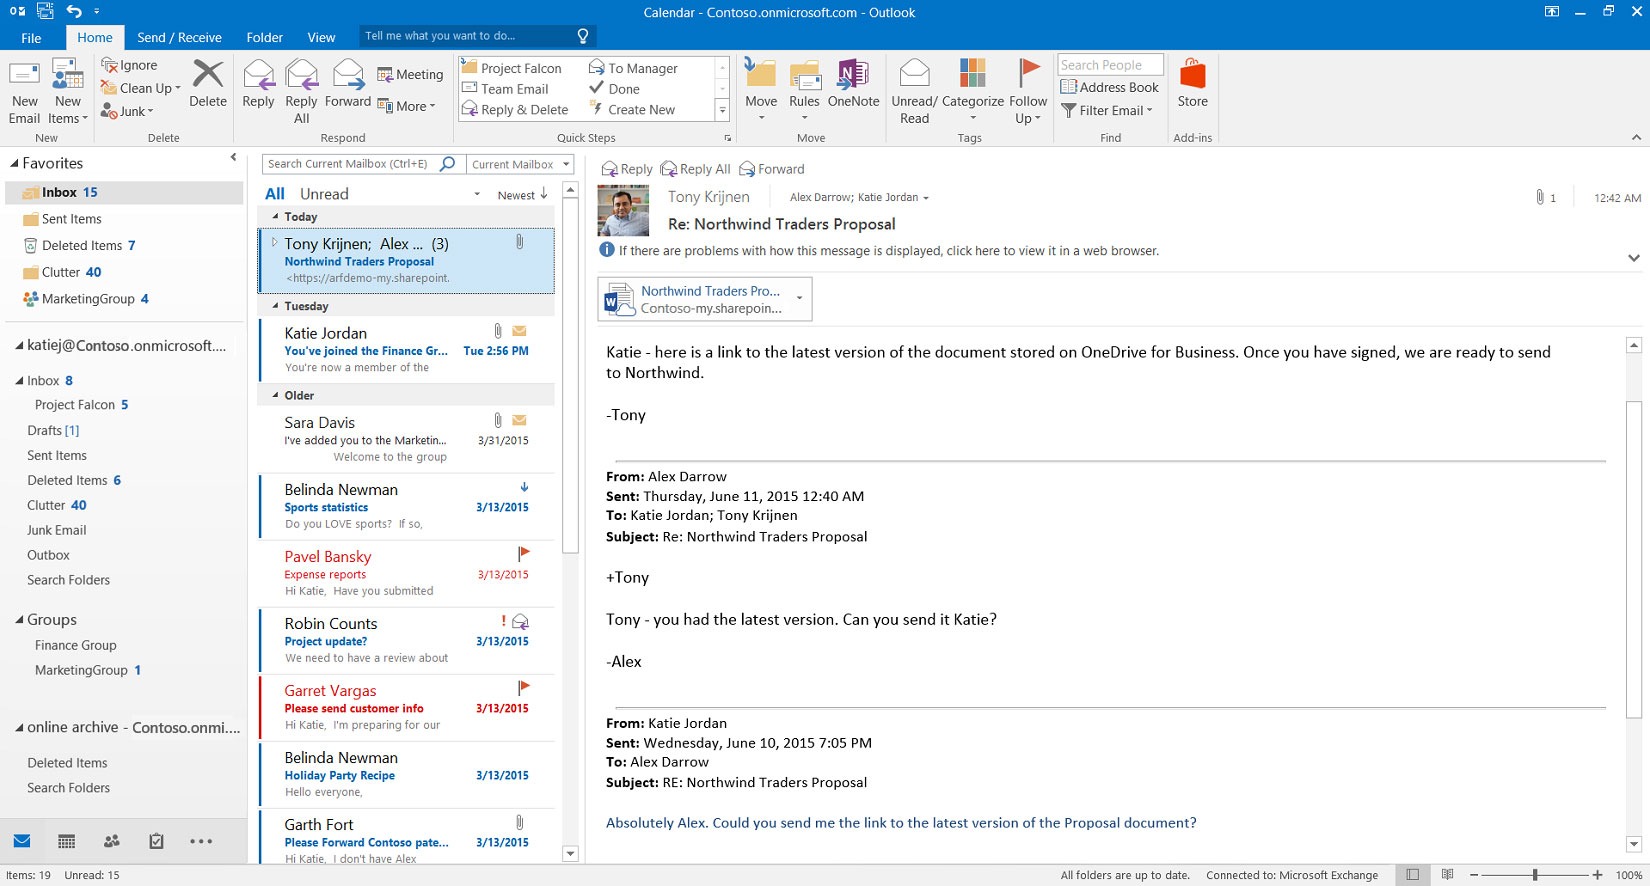 free microsoft outlook 2016 download